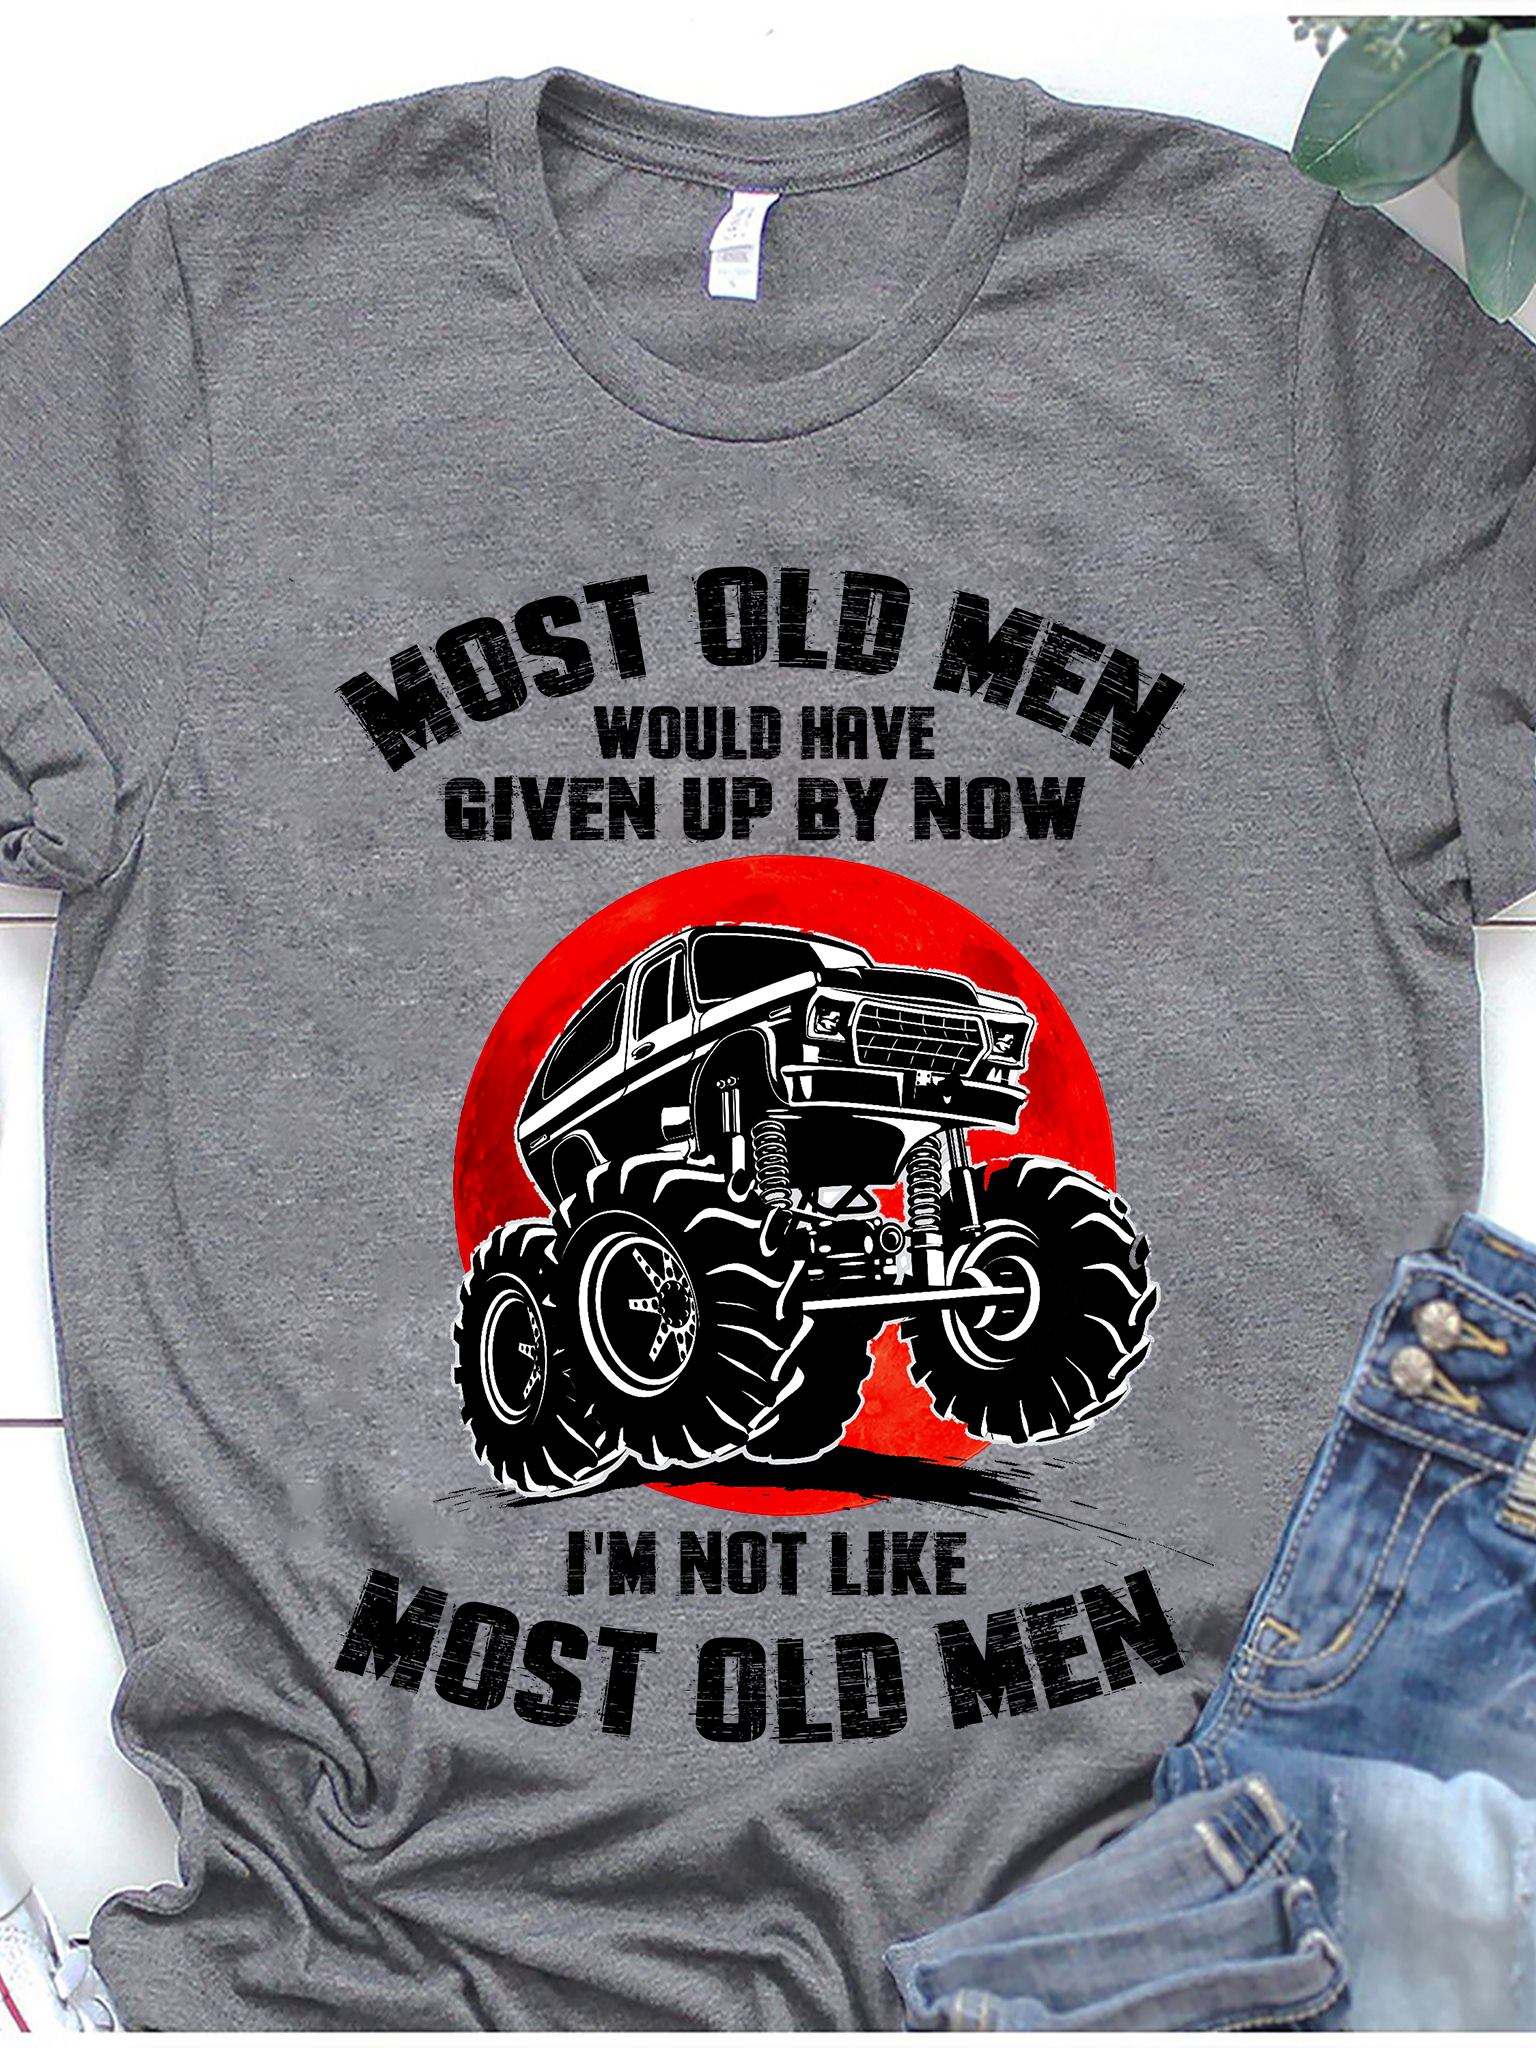 Most old men would have given up by now I'm not like most old men - Old men racer, terrain vehicles